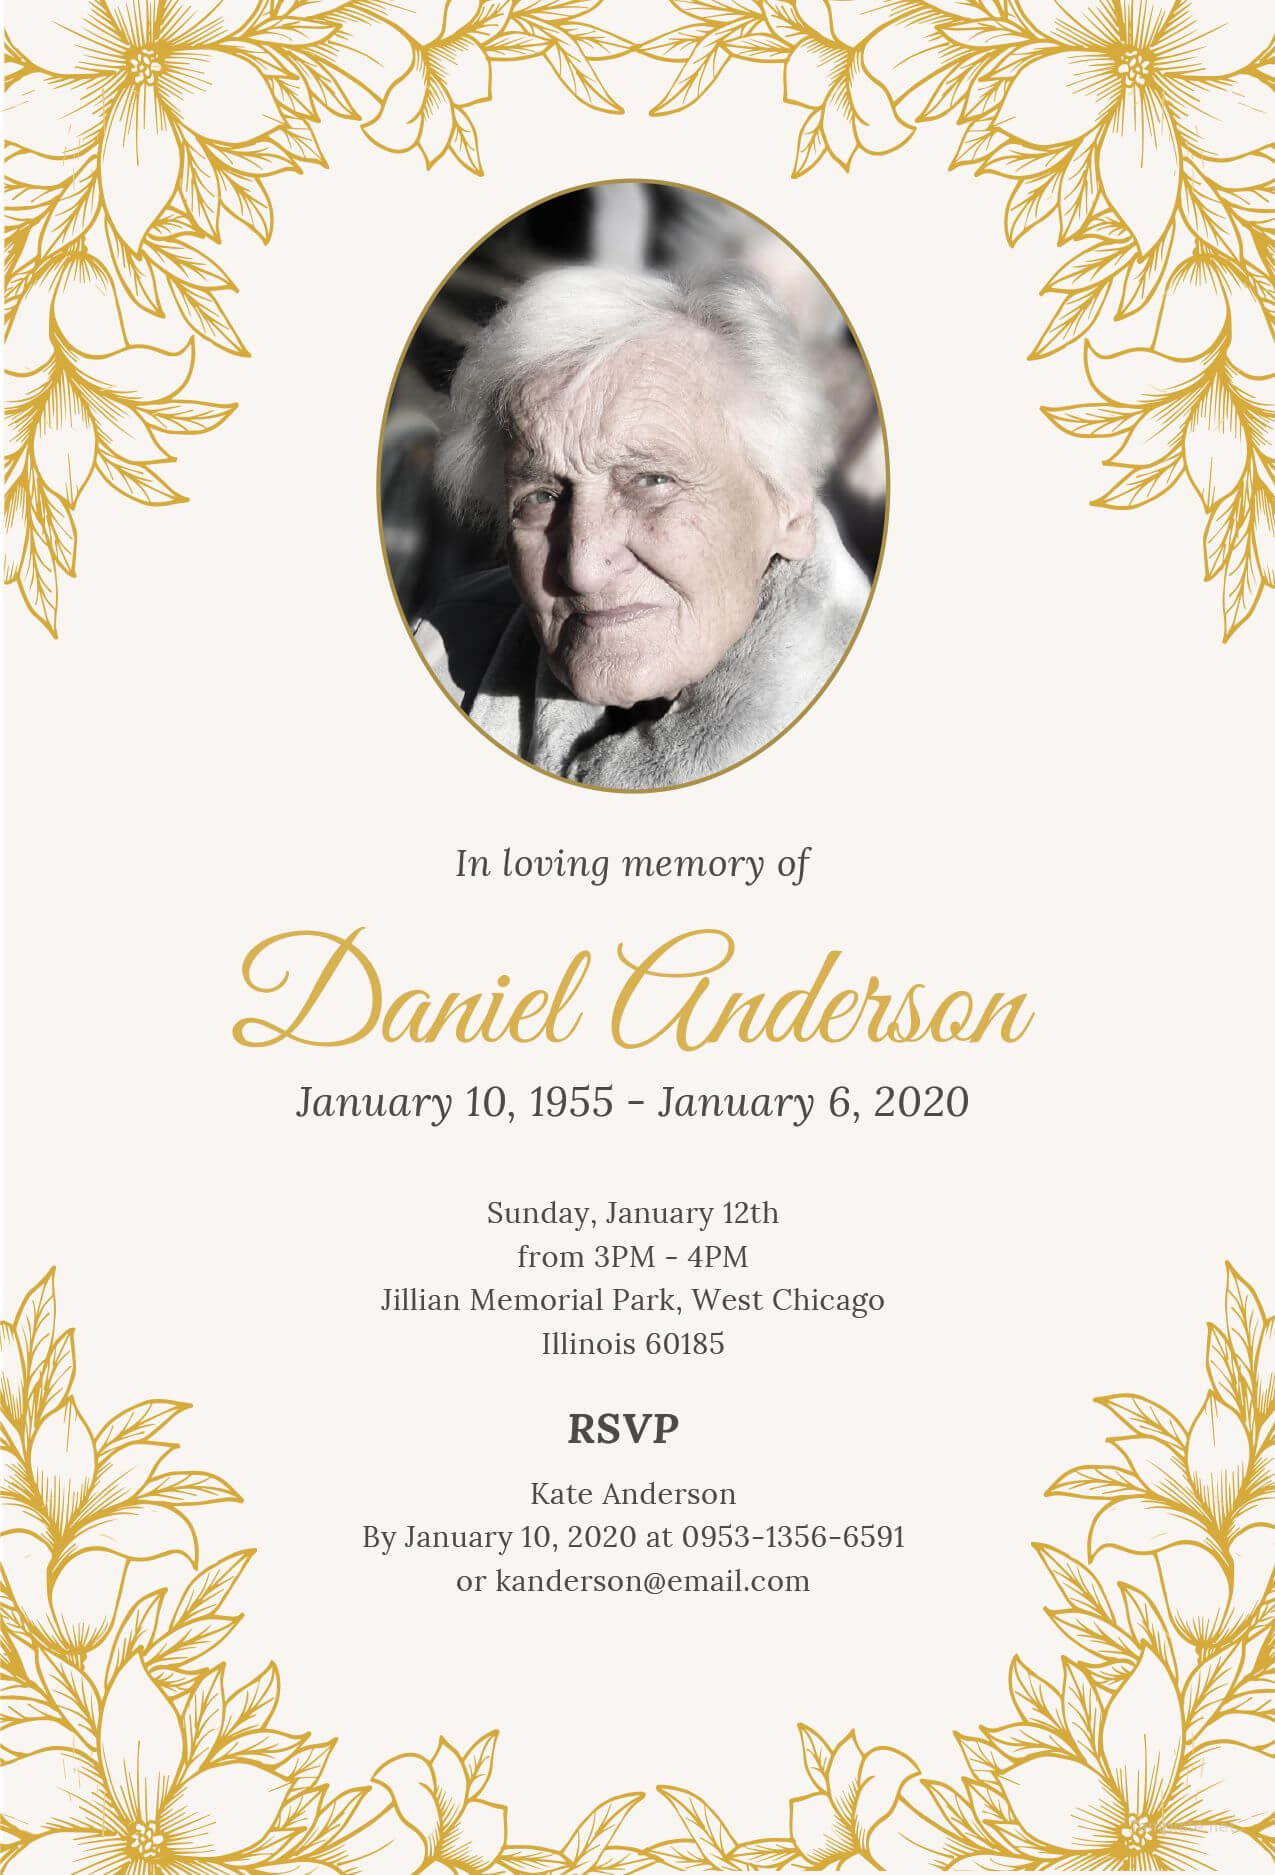 Free Funeral Ceremony Invitation | Funeral Invitation Inside Death Anniversary Cards Templates